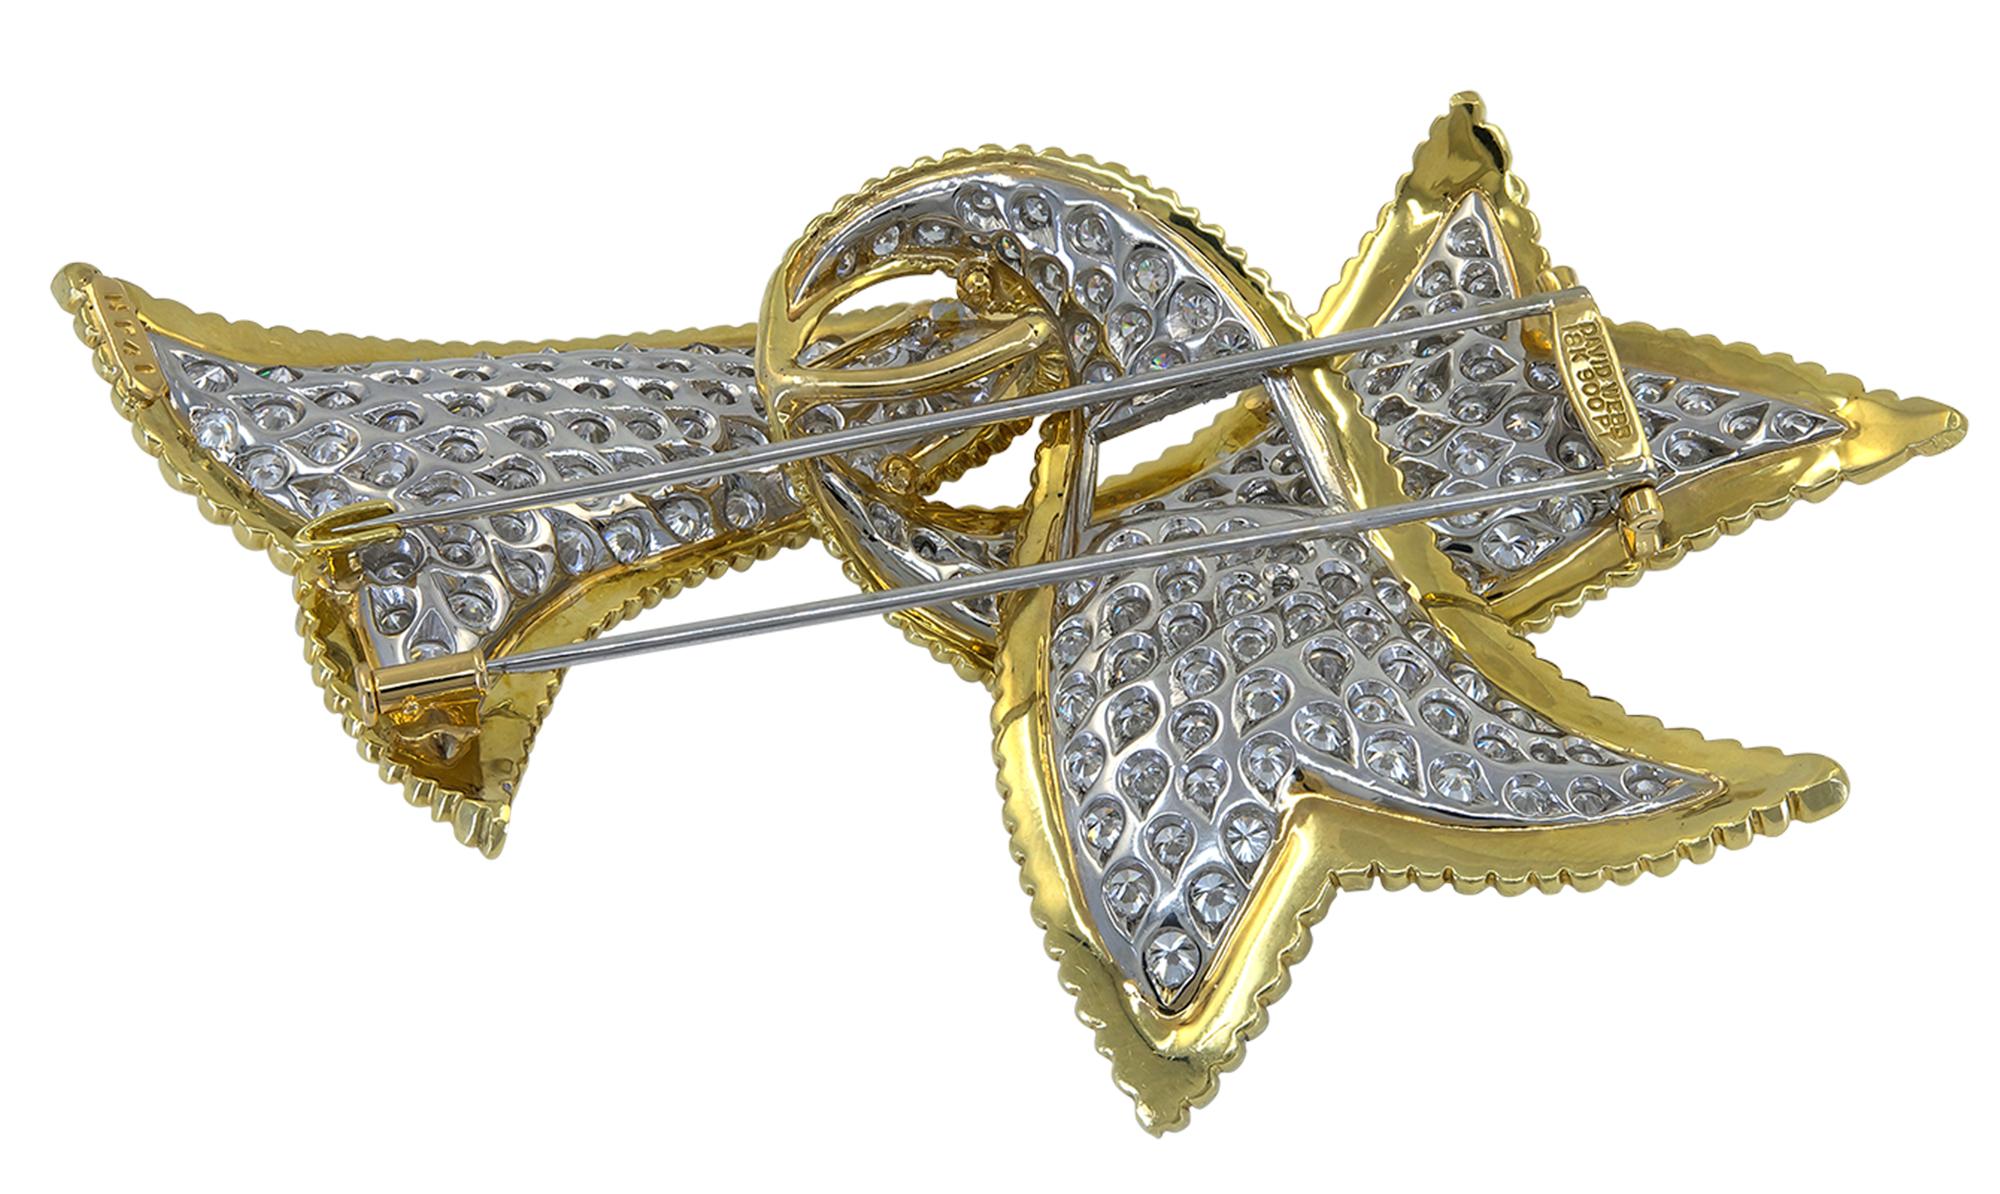 Elegant ribbon brooch created by David Webb featuring approximately 14.74 carats of brilliant-cut diamonds, textured 18K yellow gold, and platinum.
Signed David Webb.
Certificate of Authenticity is provided.